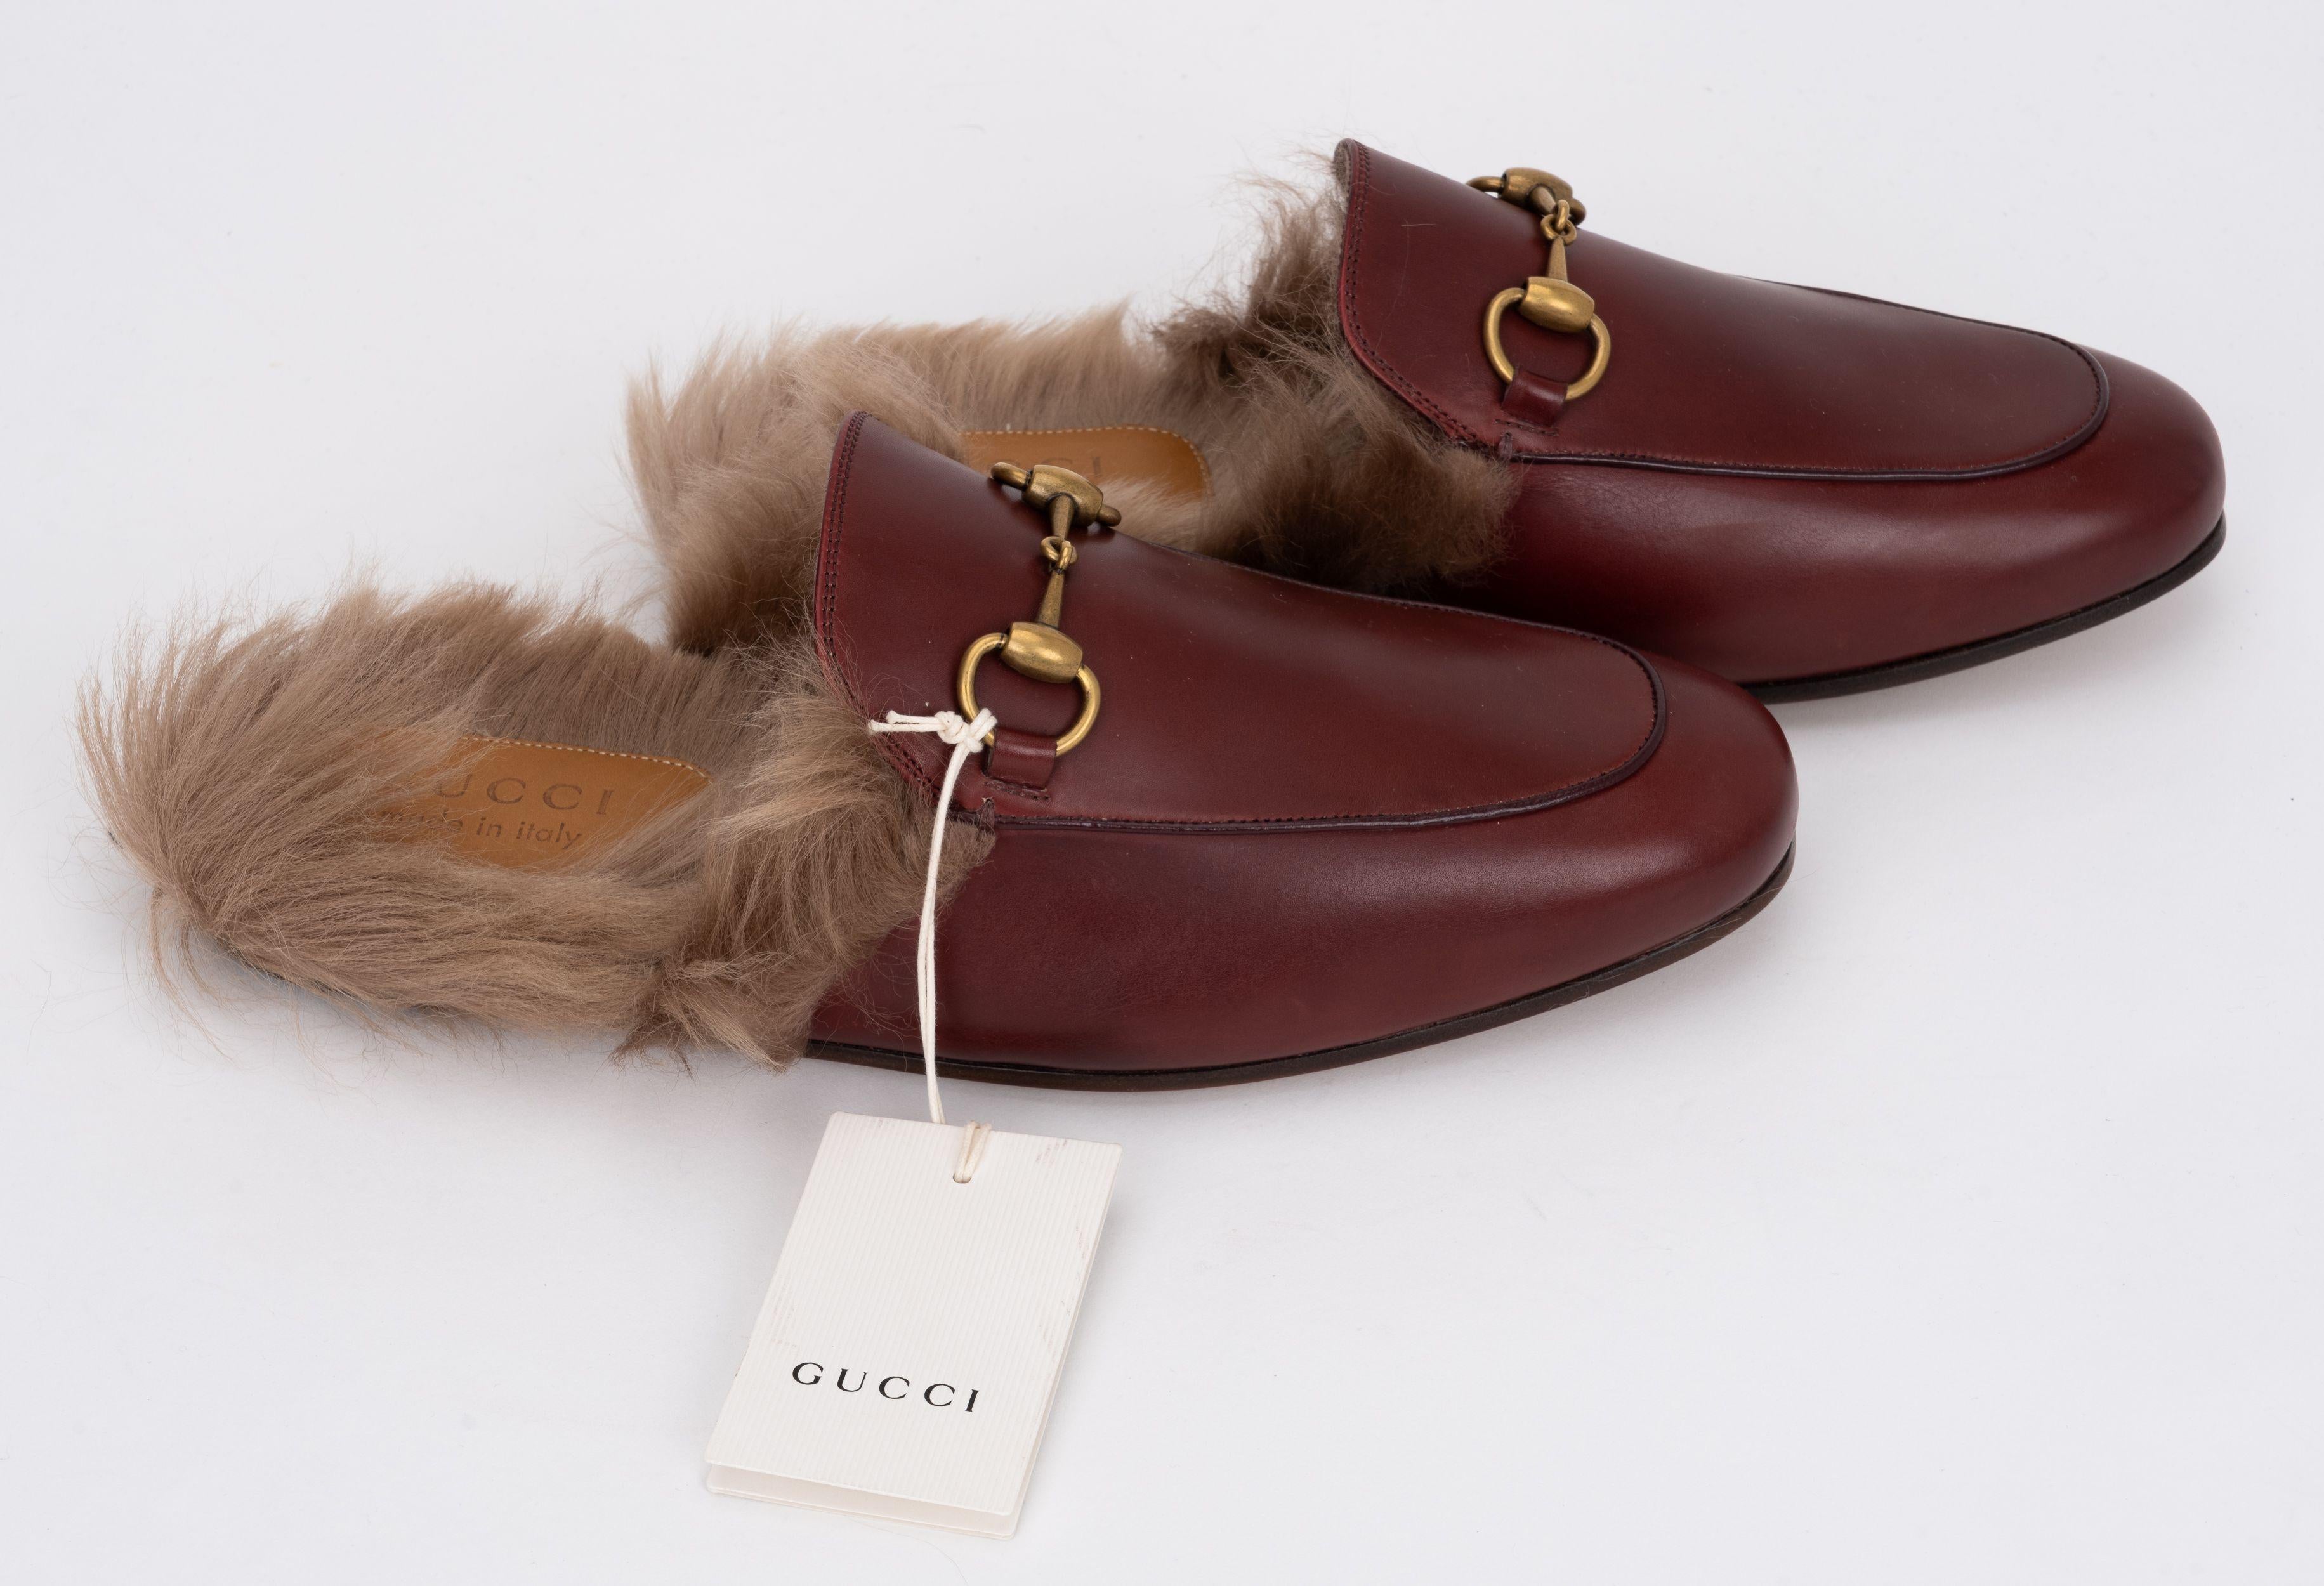 Gucci brand new maroon size 6 furry slippers. Men s size. 
The Princetown slipper is fully lined and trimmed with wool then finished with the House's signature Horsebit detail. Comes with box and double dust covers.